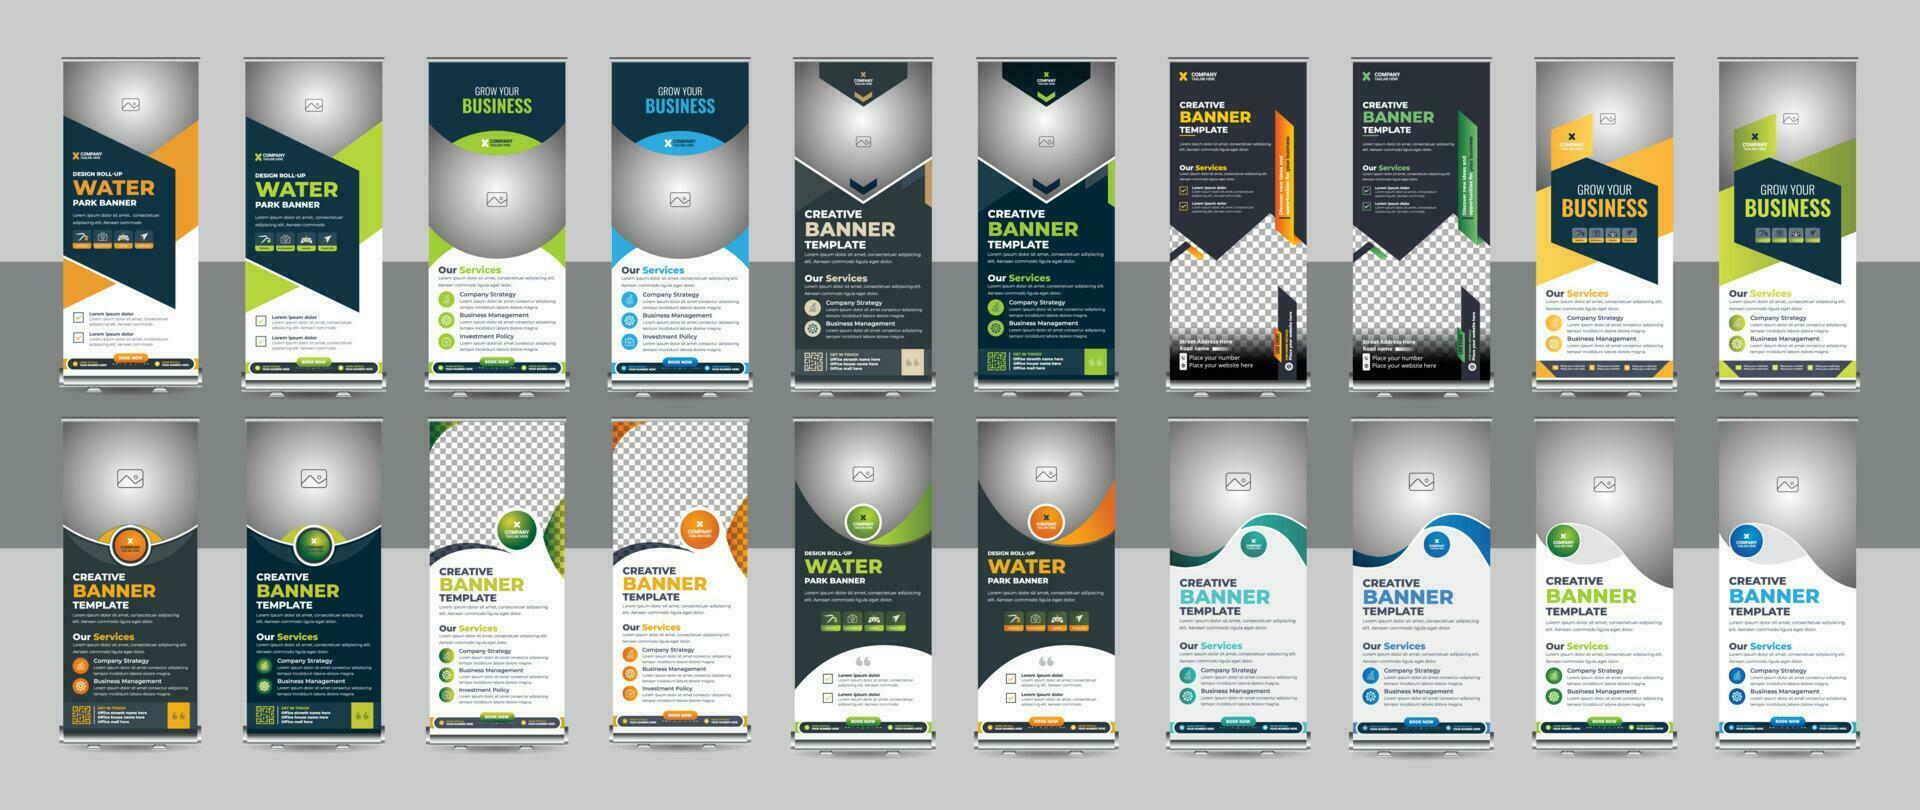 Roll up banner design template bundle, Business banner layout. vertical, abstract background, pull up design, modern x-banner, rectangle size, presentation, poster, advertisement, print media vector